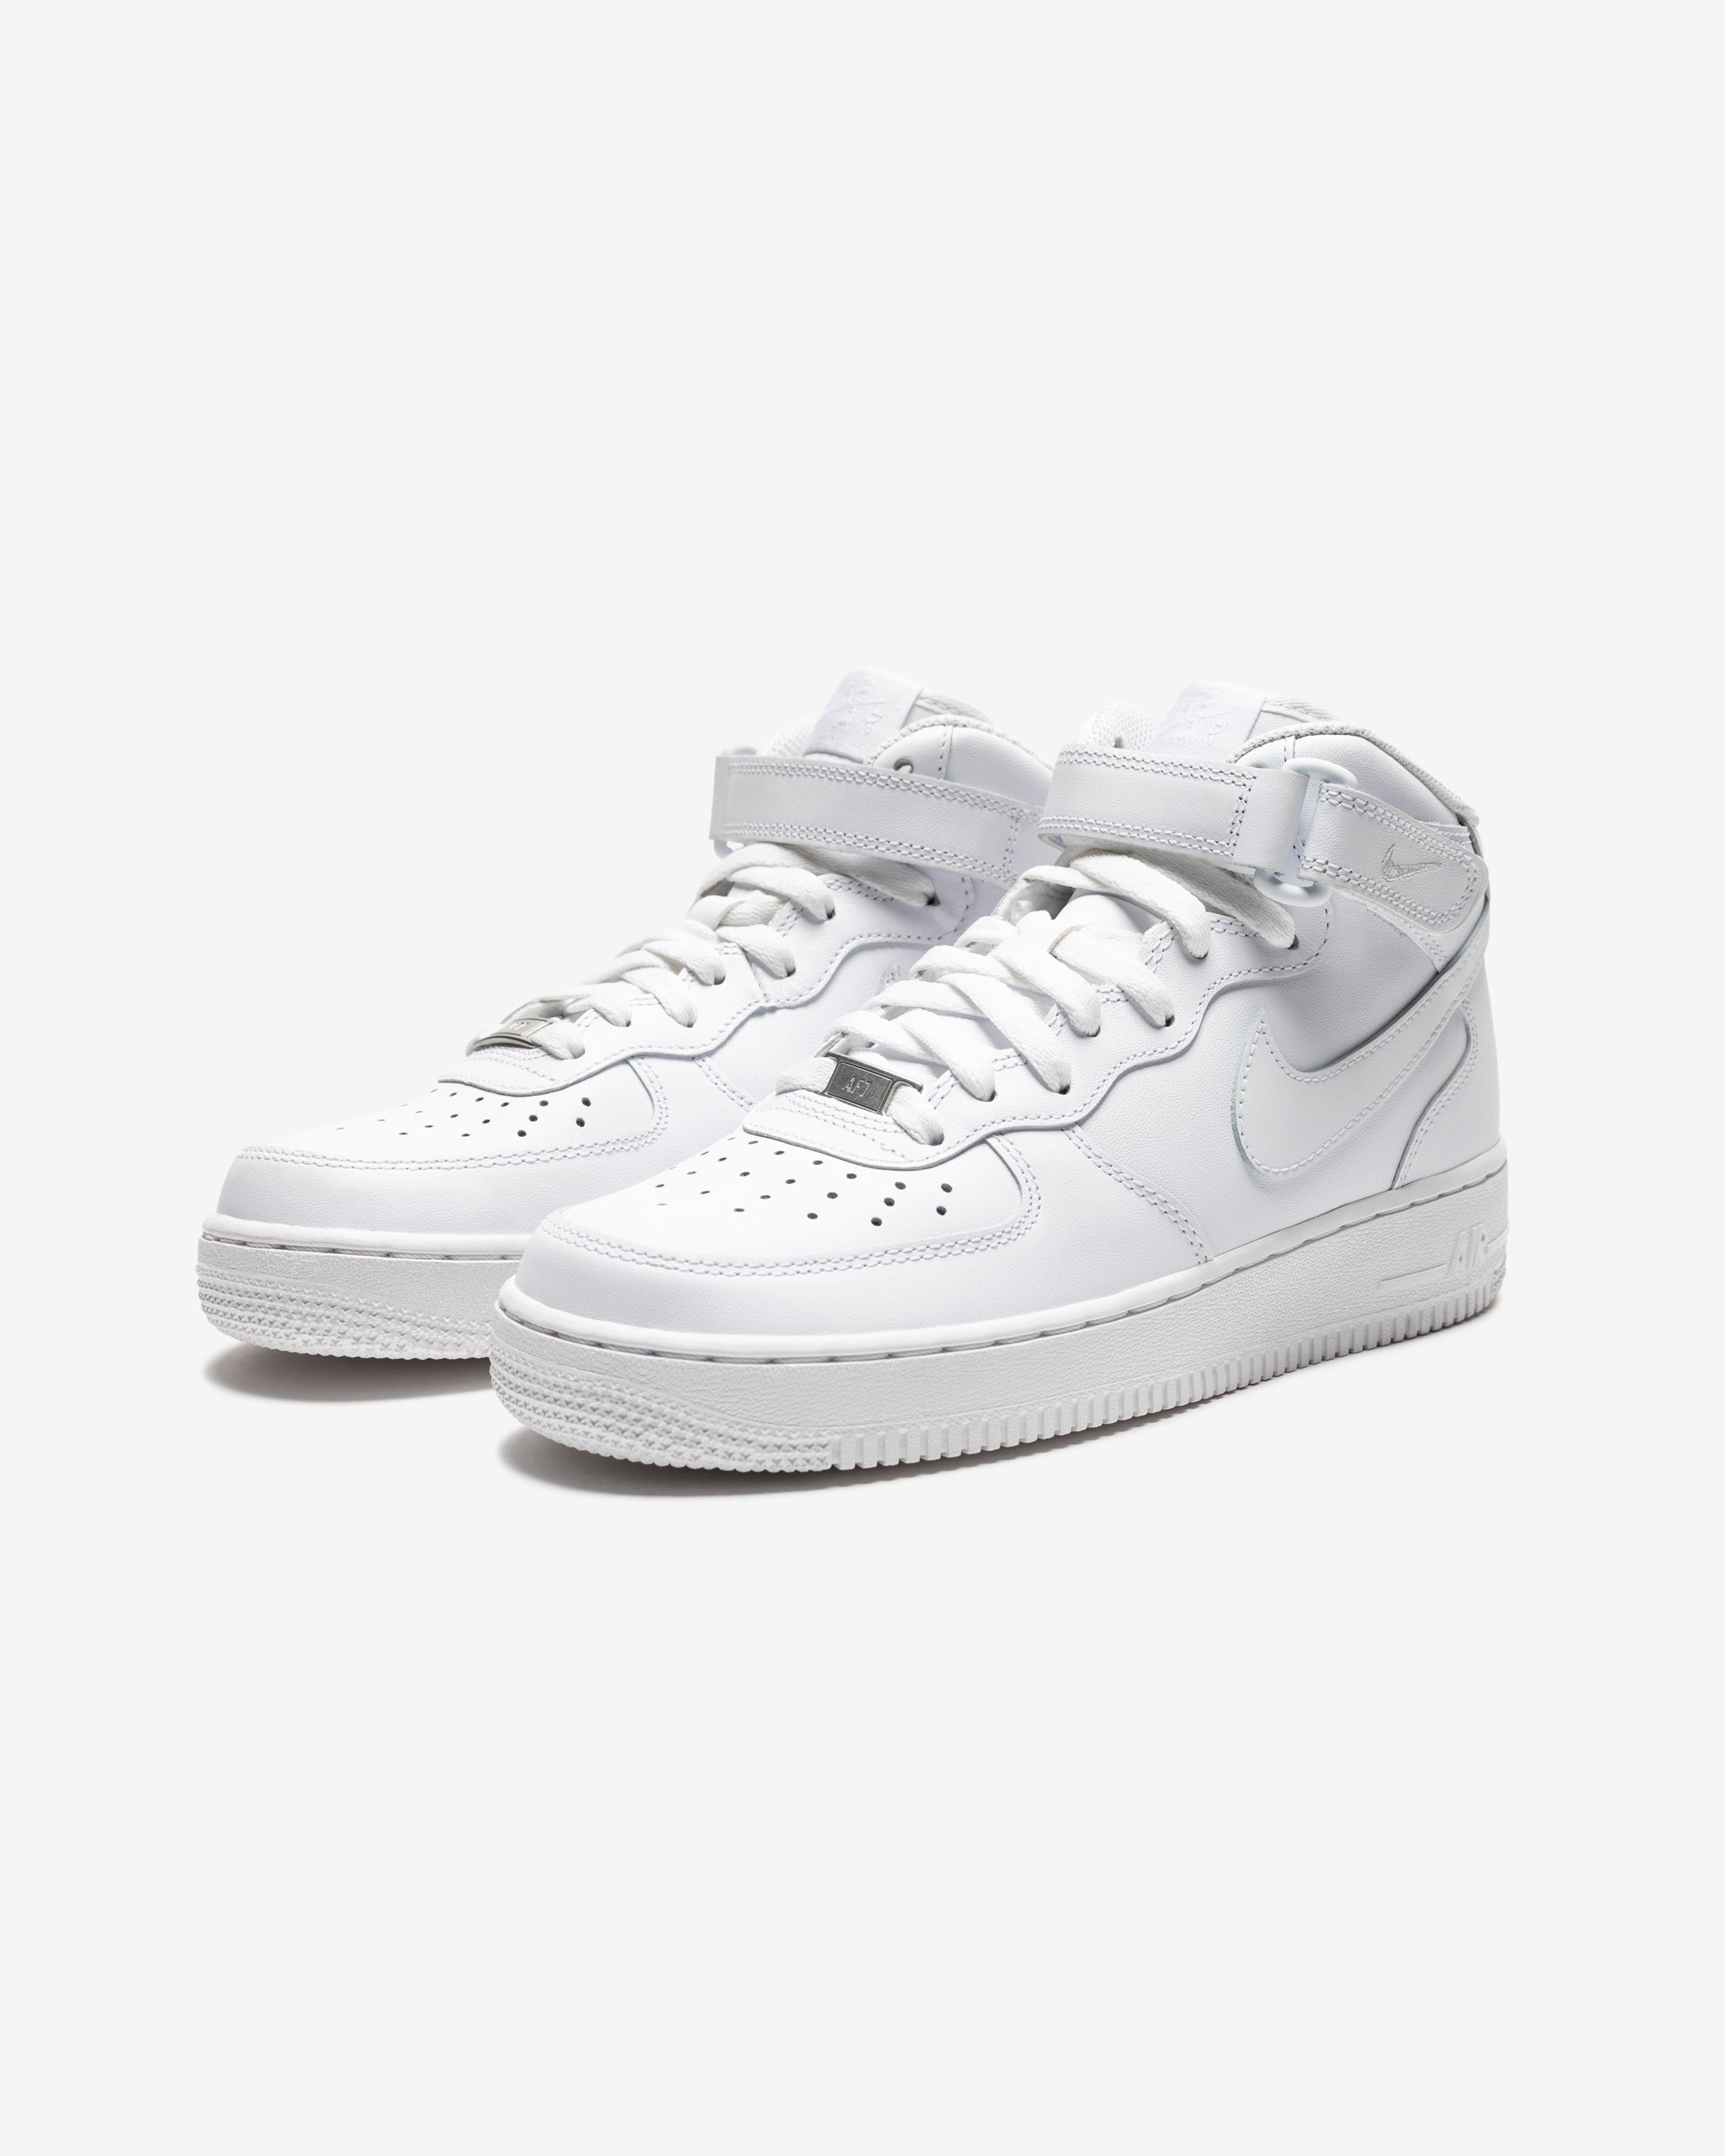 NIKE WOMEN'S AIR FORCE 1 '07 MID - WHITE